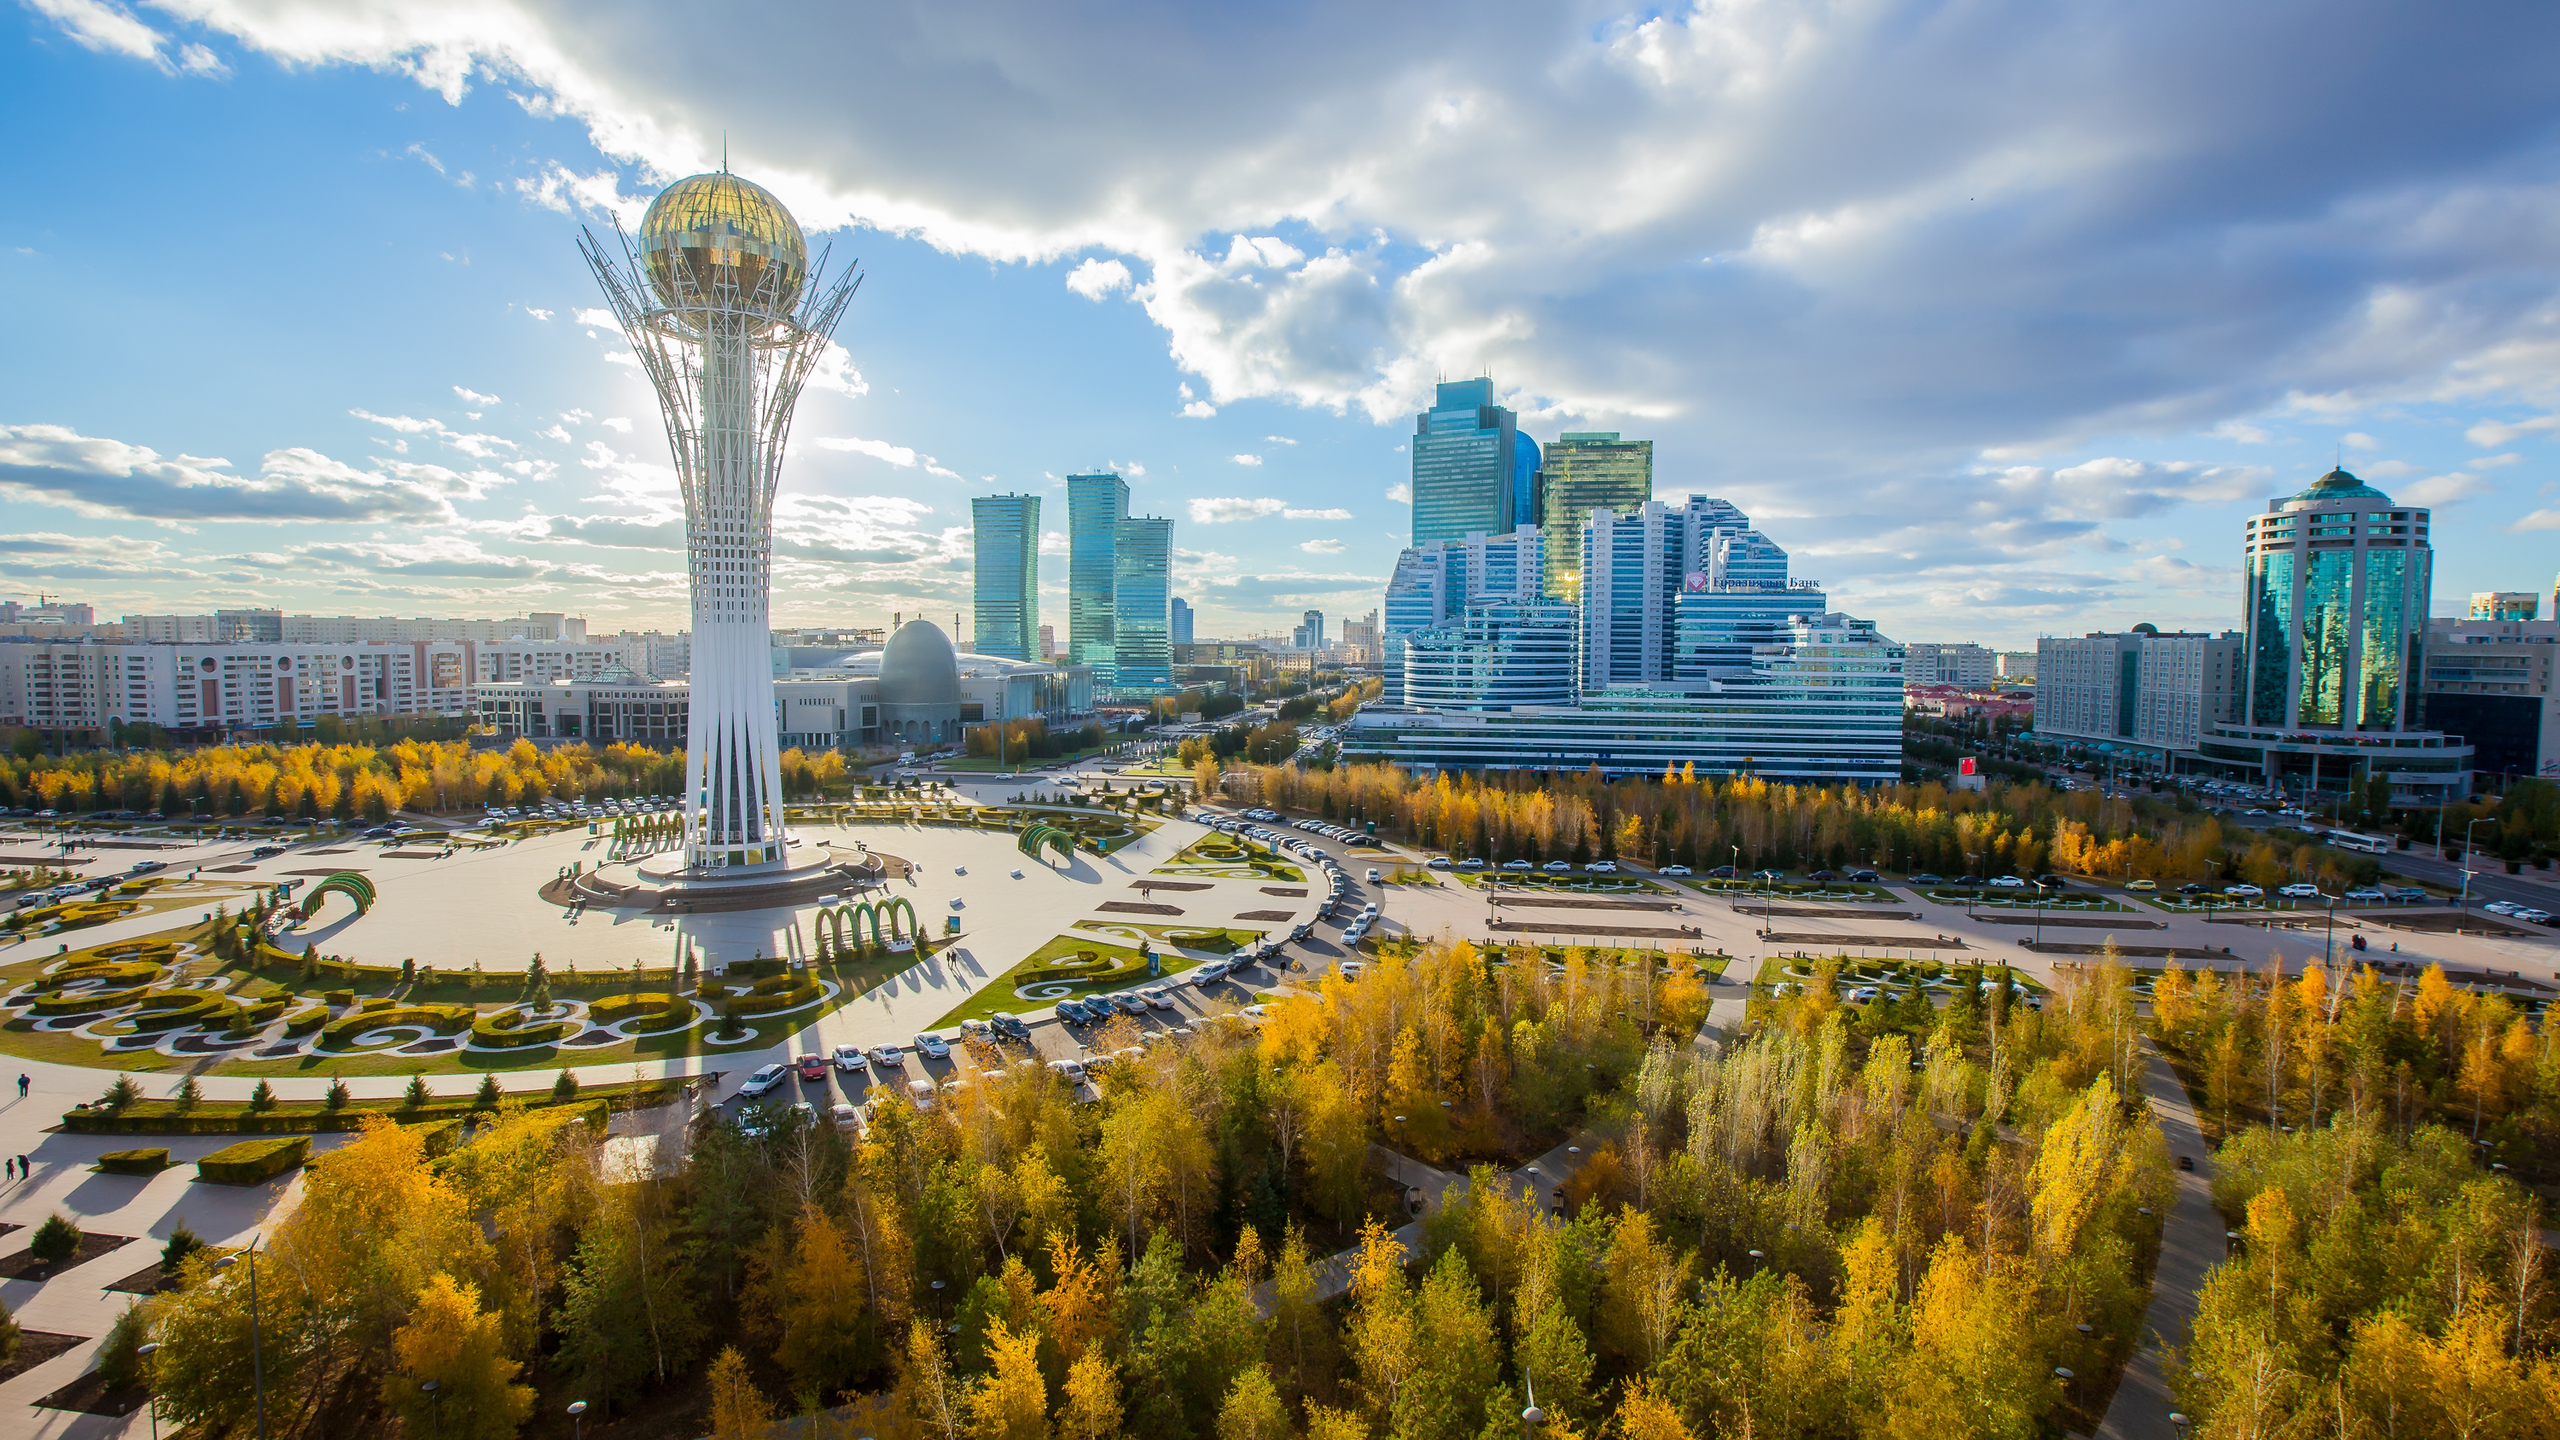 Chaos in Kazakhstan: What we know so far